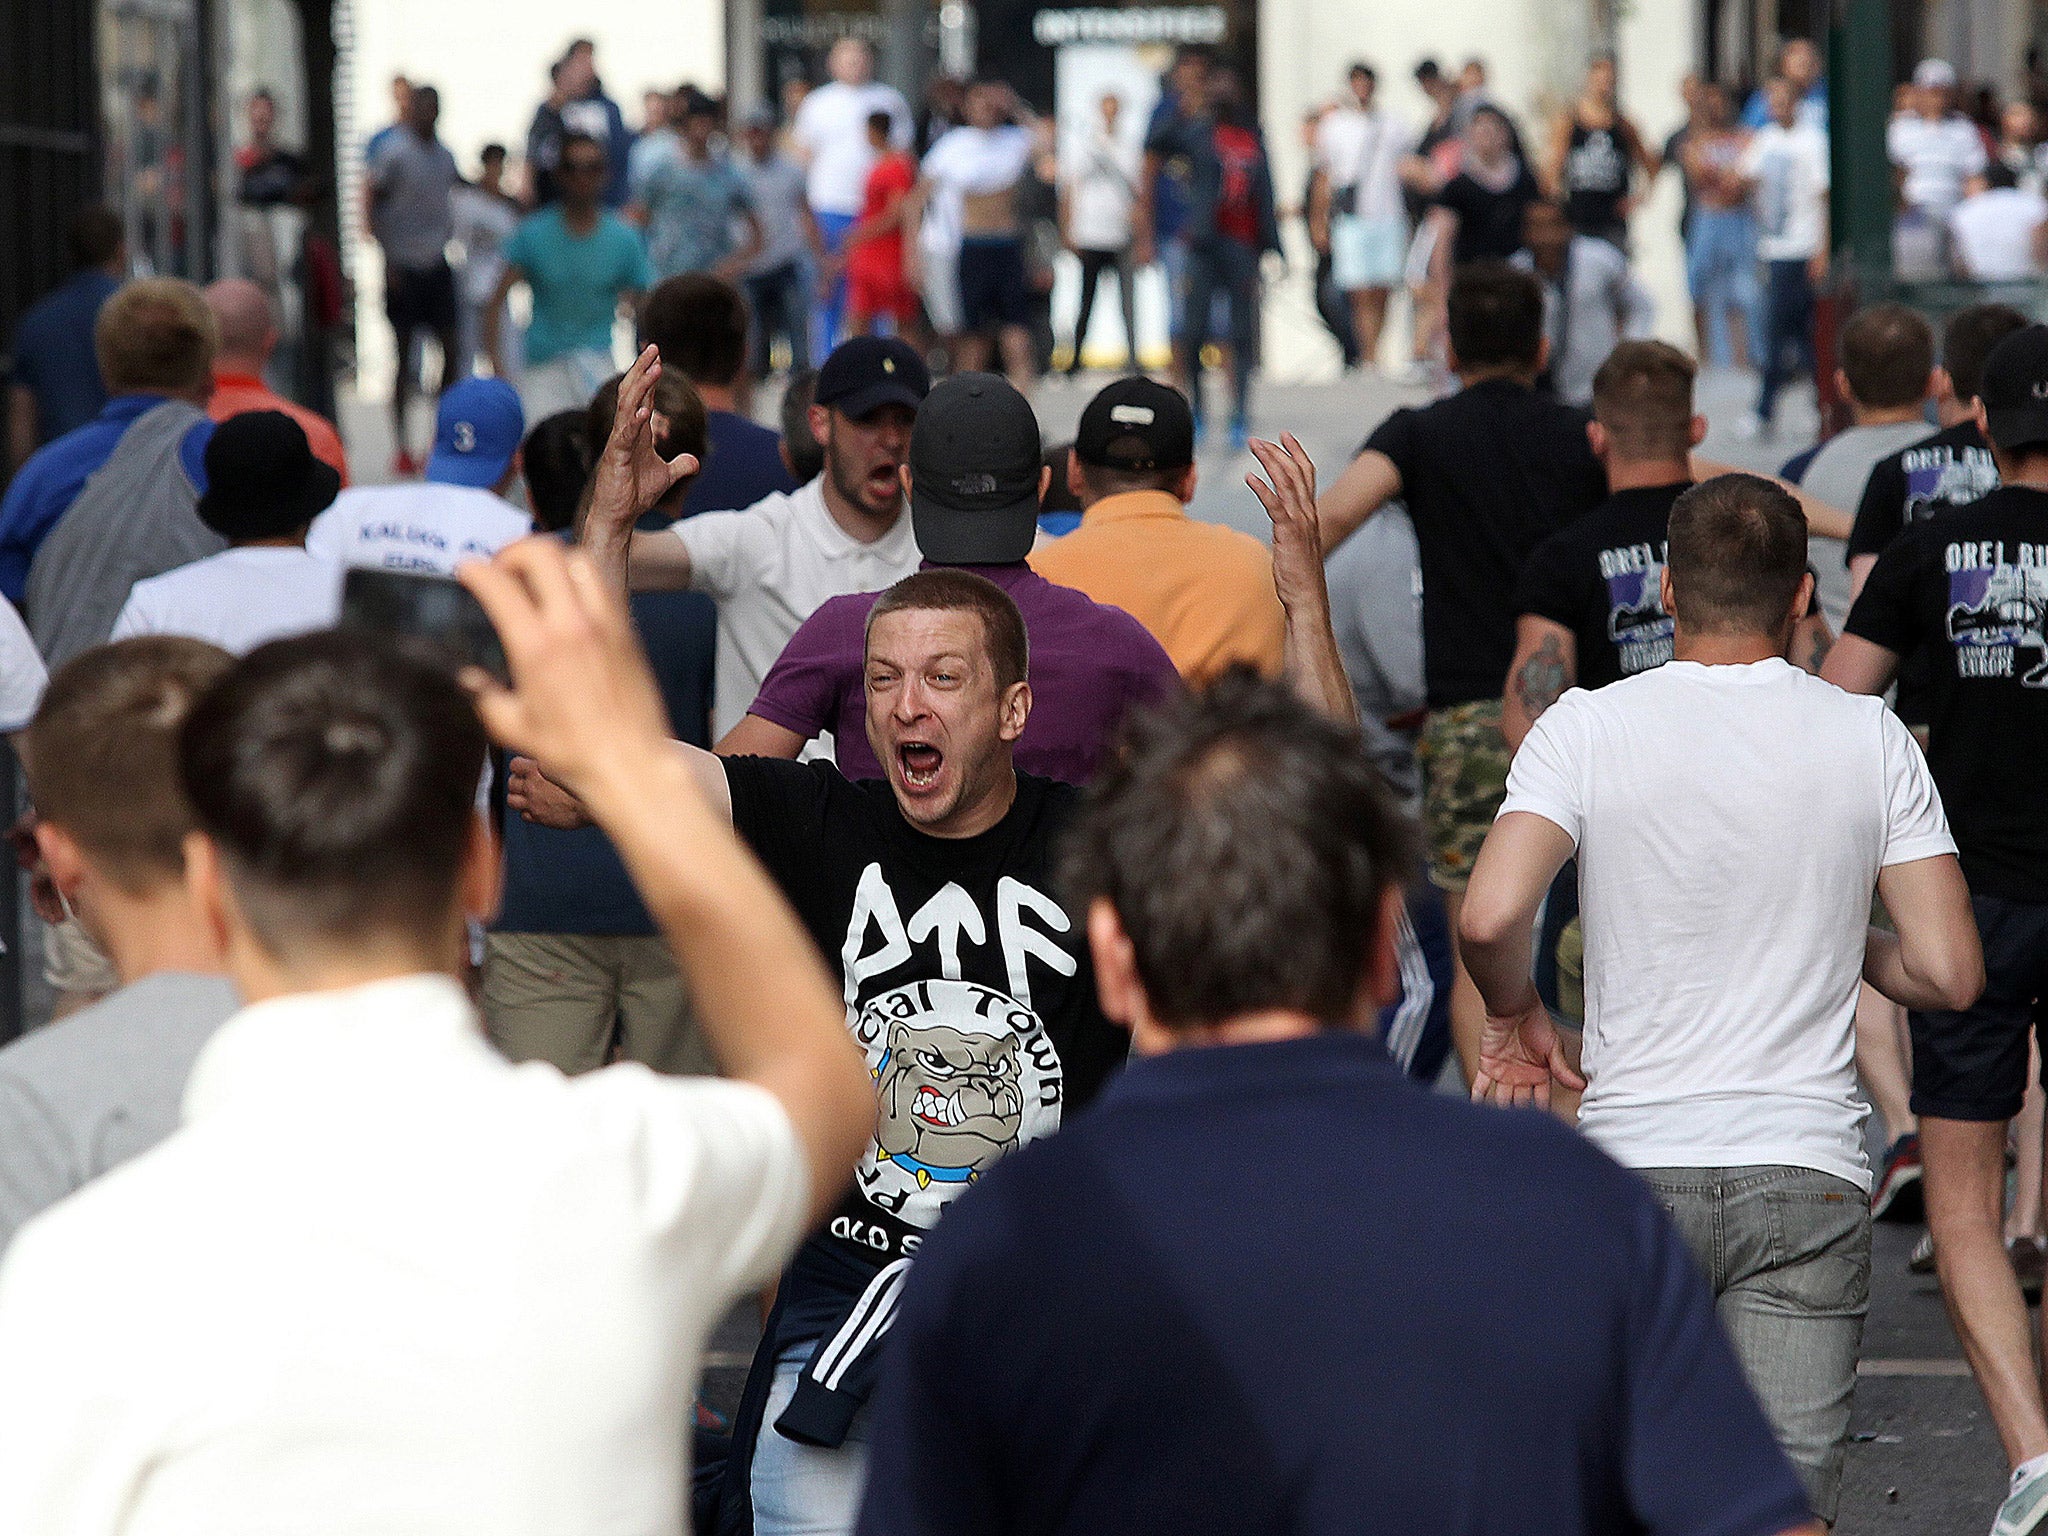 Russia and England fans clashed in Marseille before and after Saturday's Euro 2016 Group B match